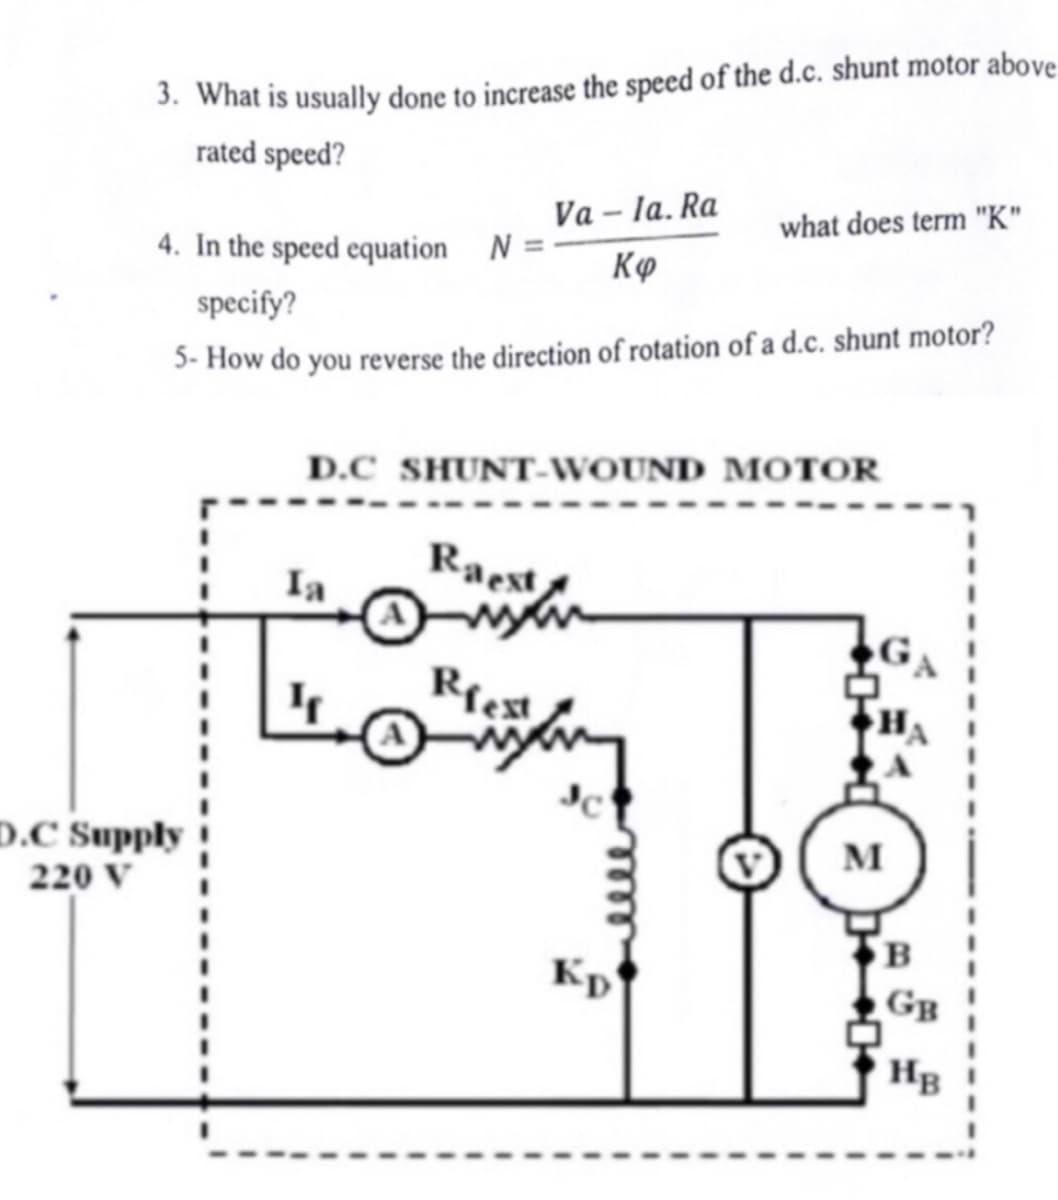 3. What is usually done to increase the speed of the d.c. shunt motor above
rated speed?
D.C Supply
220 V
4. In the speed equation N =
specify?
5-How do you reverse the direction of rotation of a d.c. shunt motor?
Ia
Va-la. Ra
Kø
D.C SHUNT-WOUND MOTOR
Raest
www
Riest
what does term "K"
Kp
M
B
GB
HB